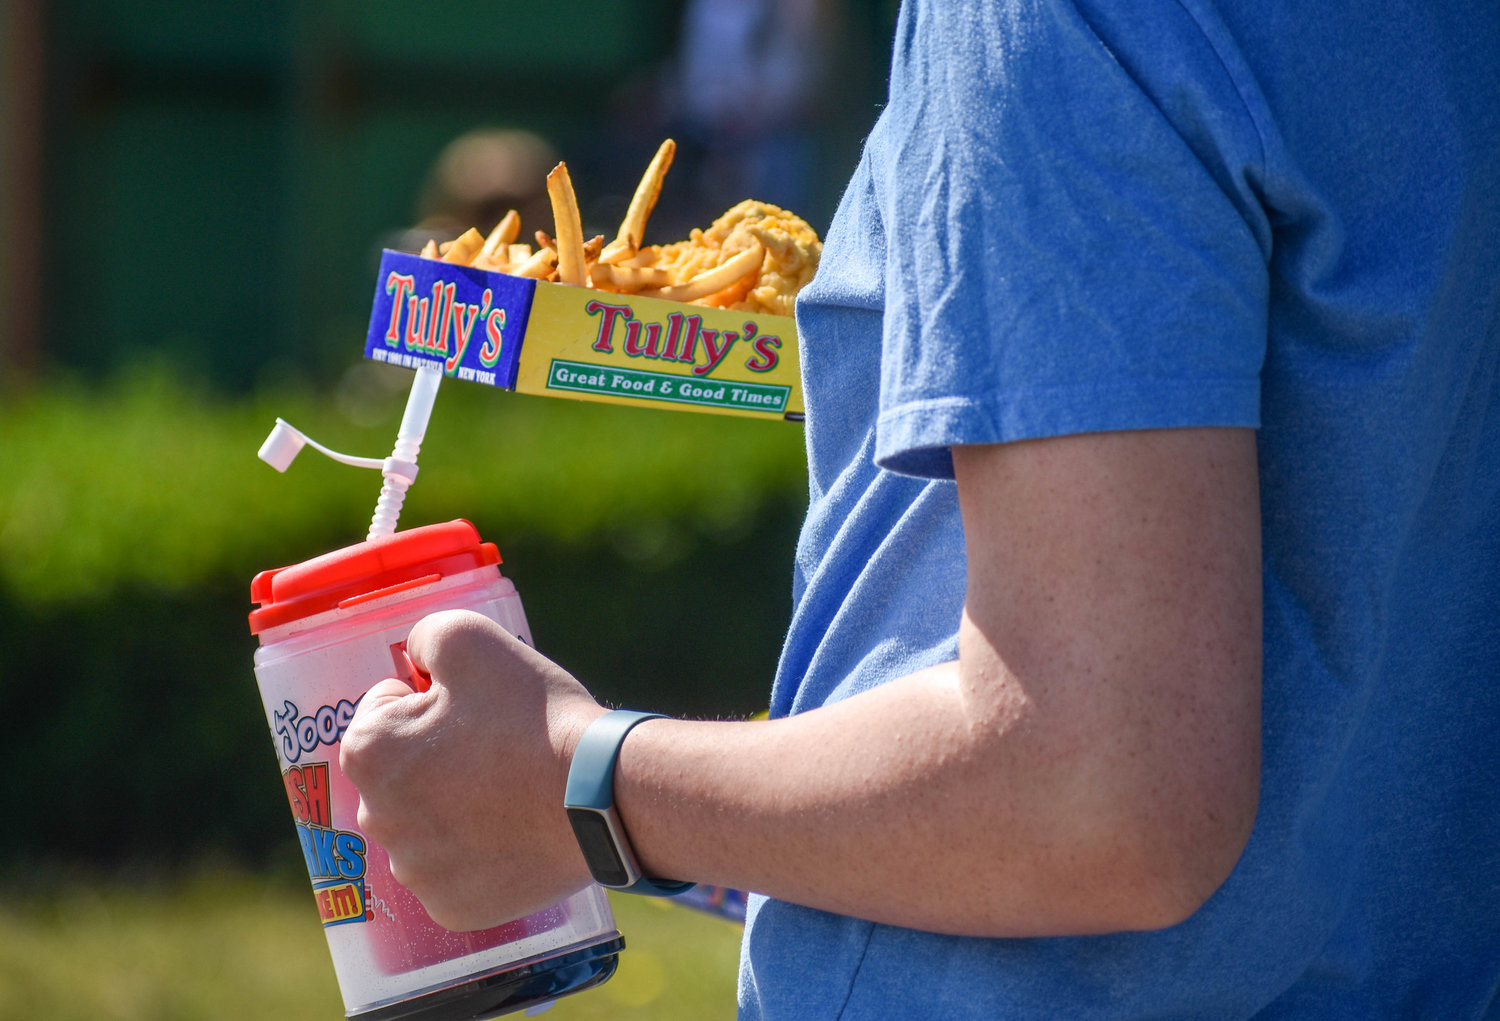 A fairgoer carries food from Tully’s, a favorite New York State Fair vendor serving its famous chicken tenders.